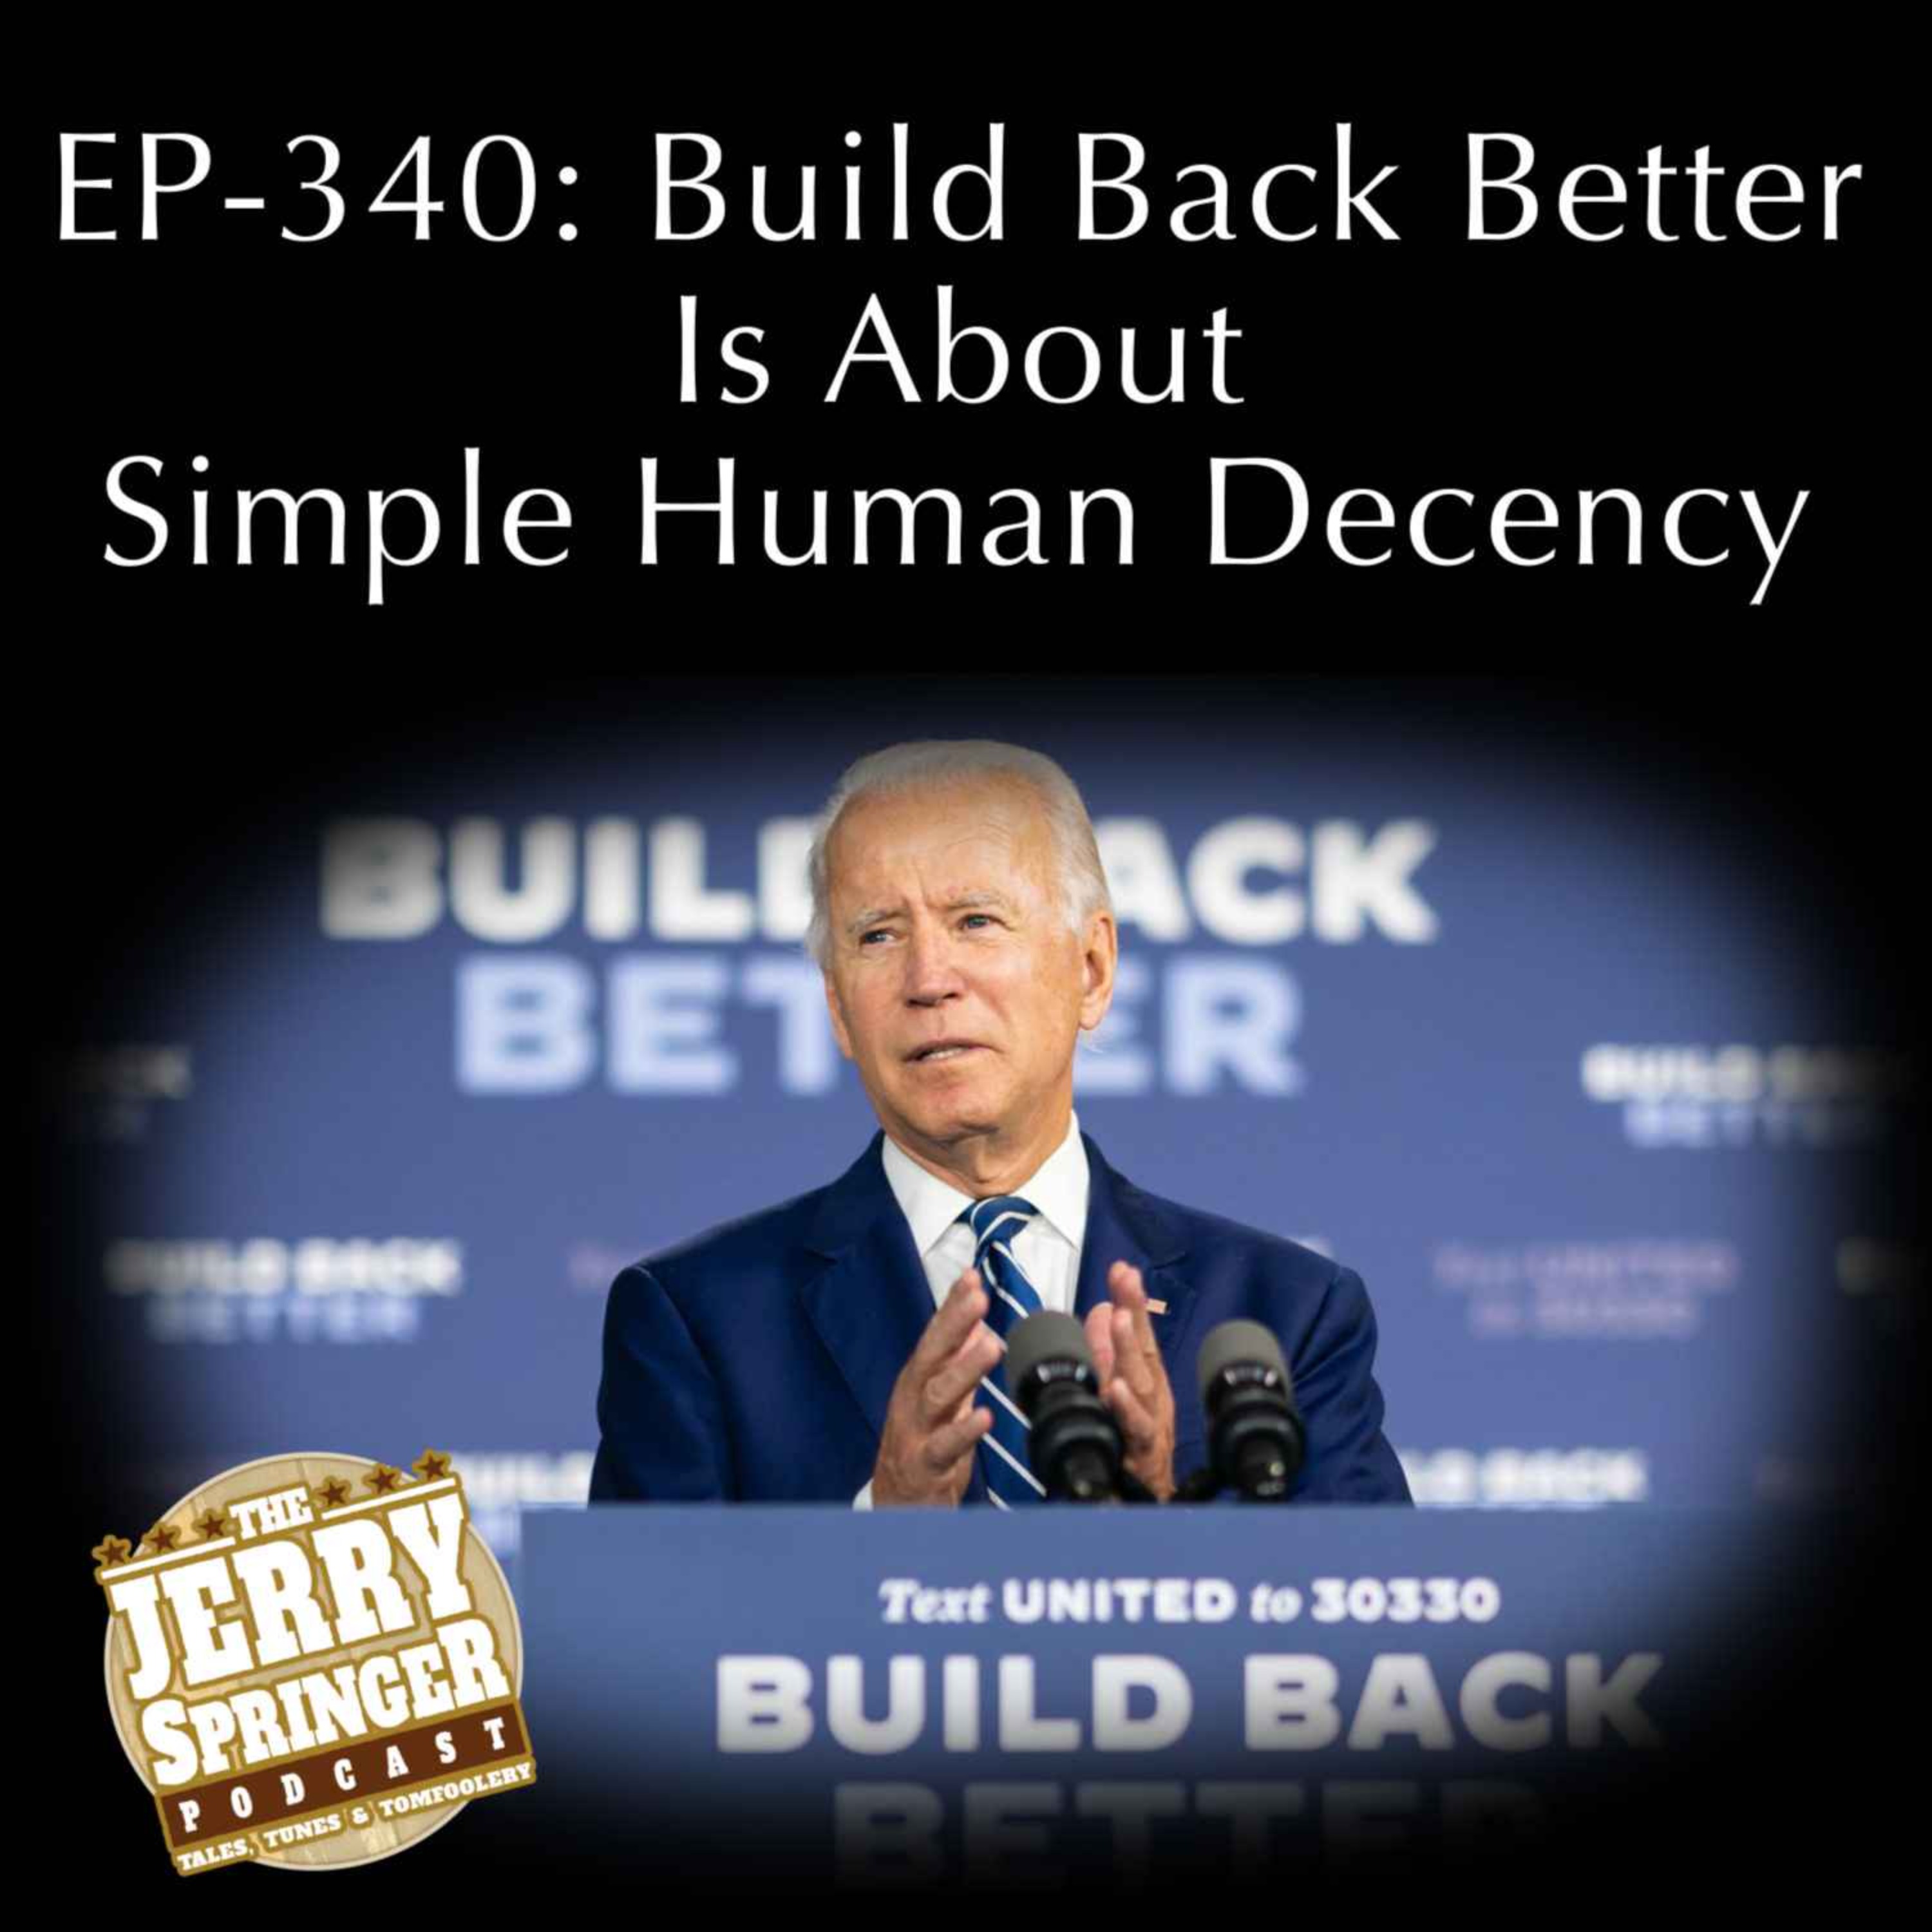 Build Back Better Is About Simple Human Decency: EP - 340